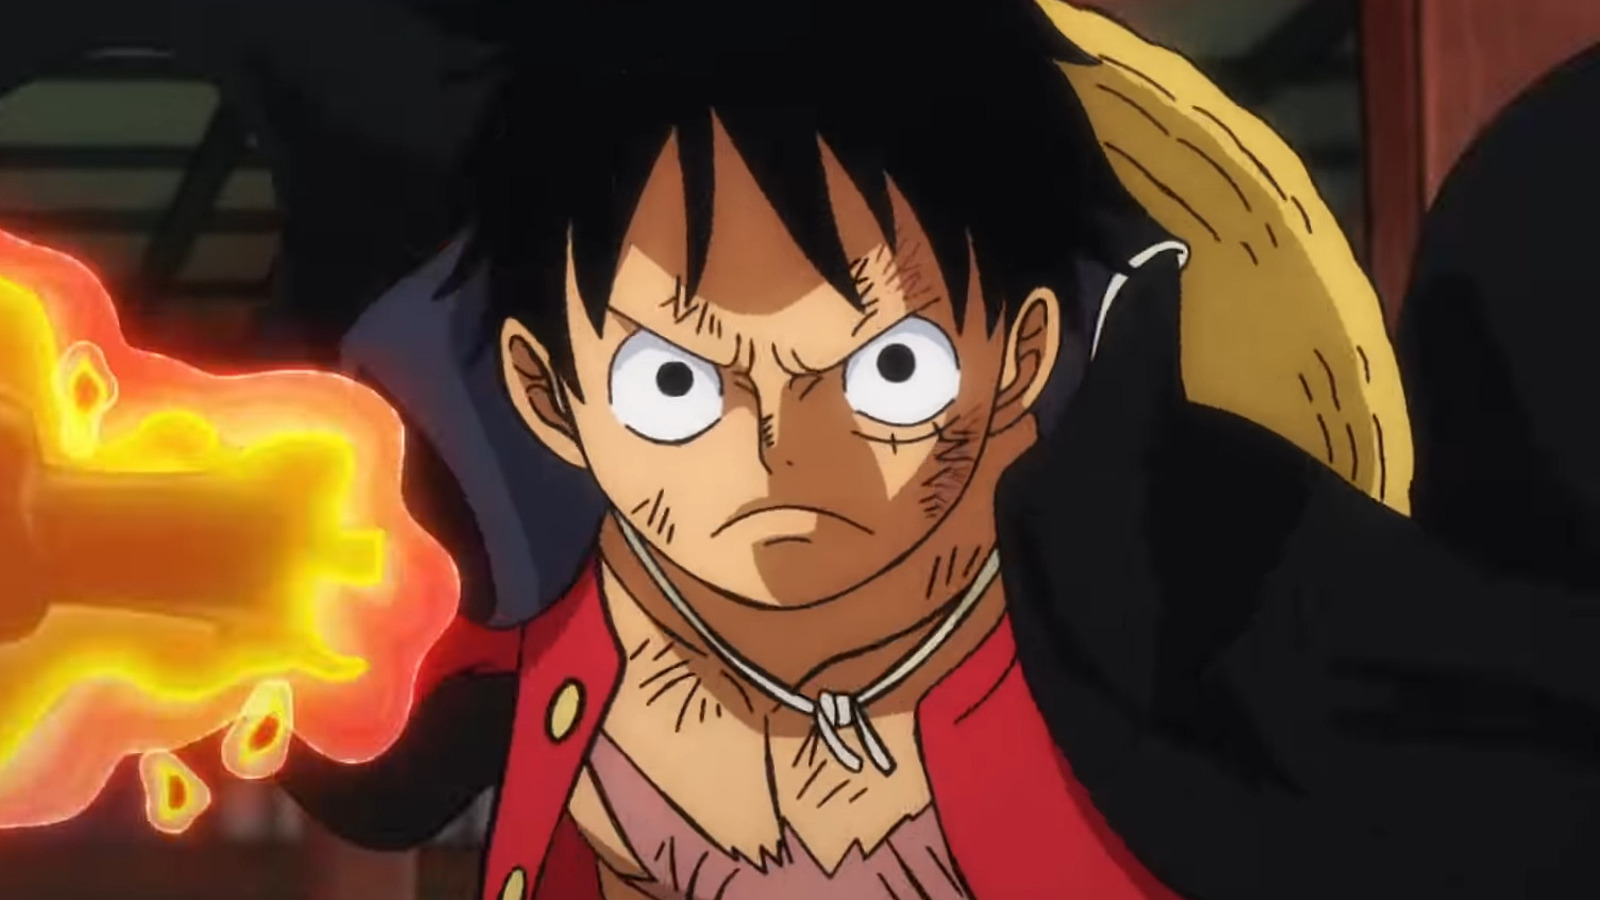 I am currently watching episode 325 of One Piece. But after it